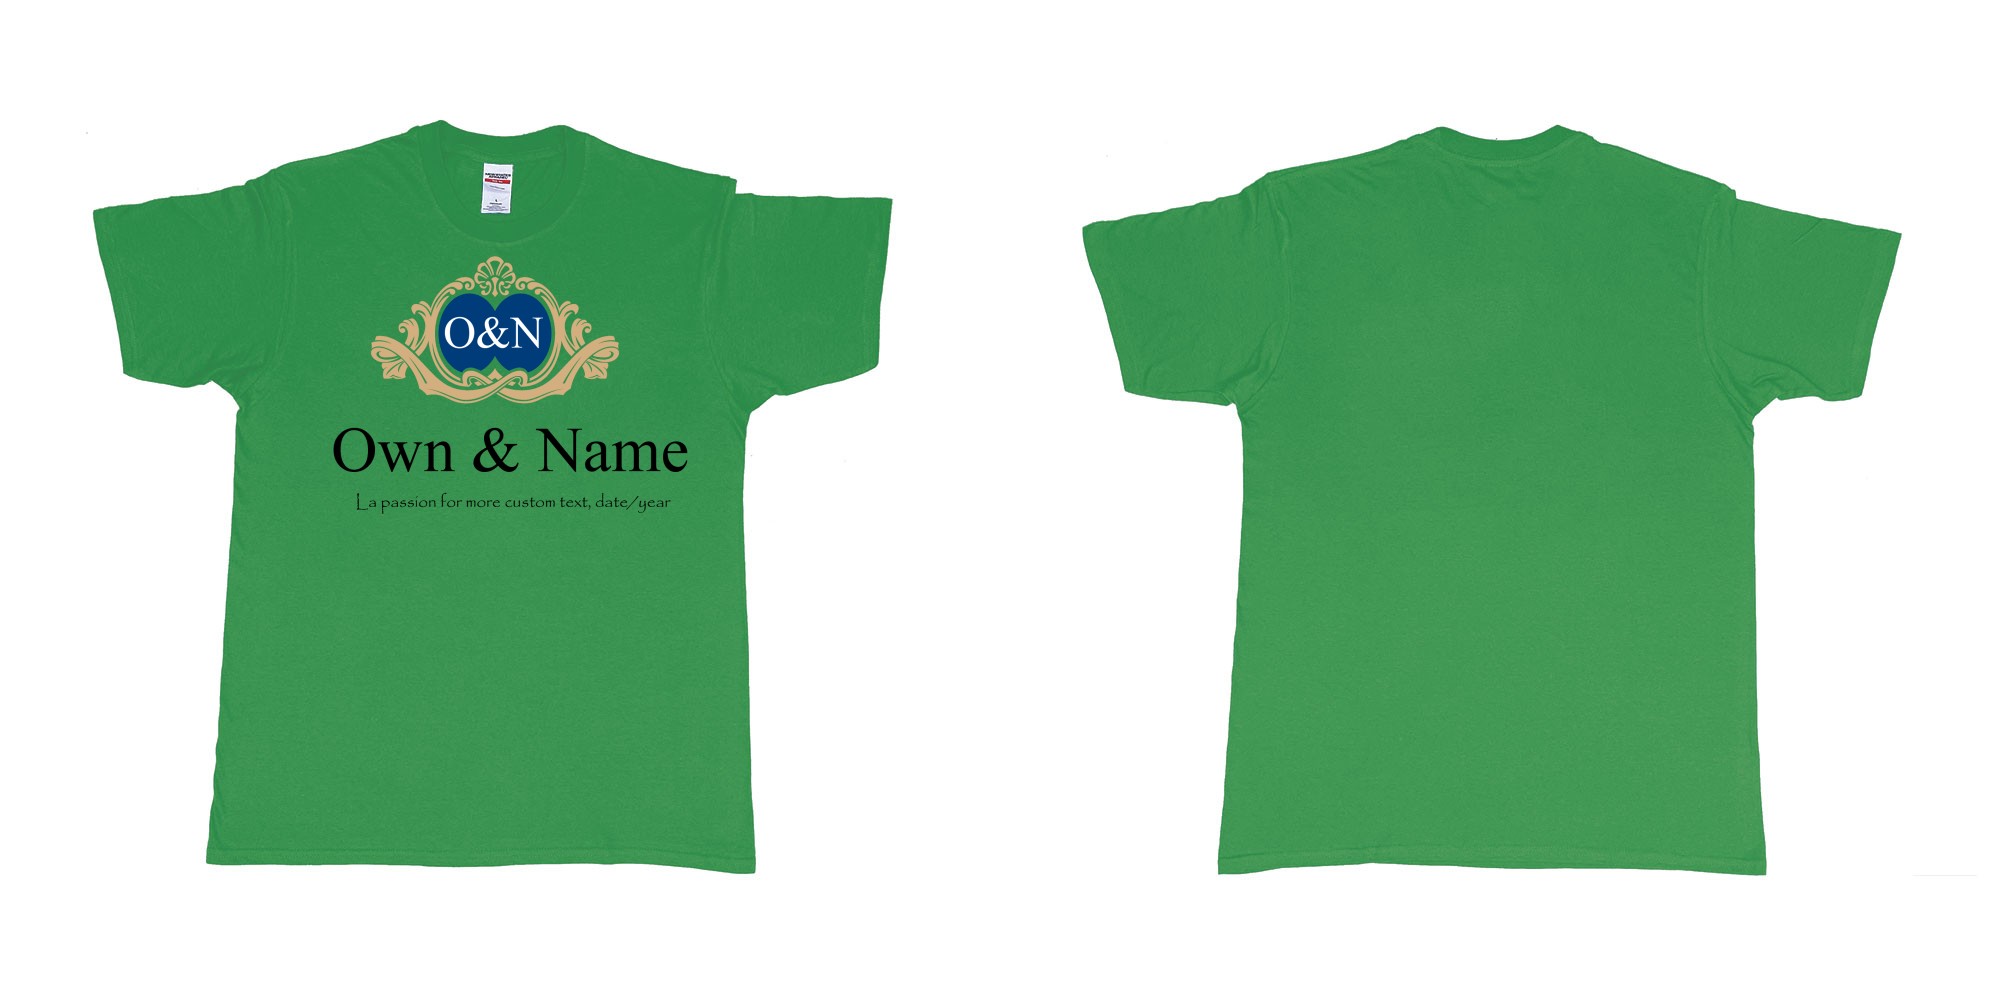 Custom tshirt design barton and guestier champagne in fabric color irish-green choice your own text made in Bali by The Pirate Way